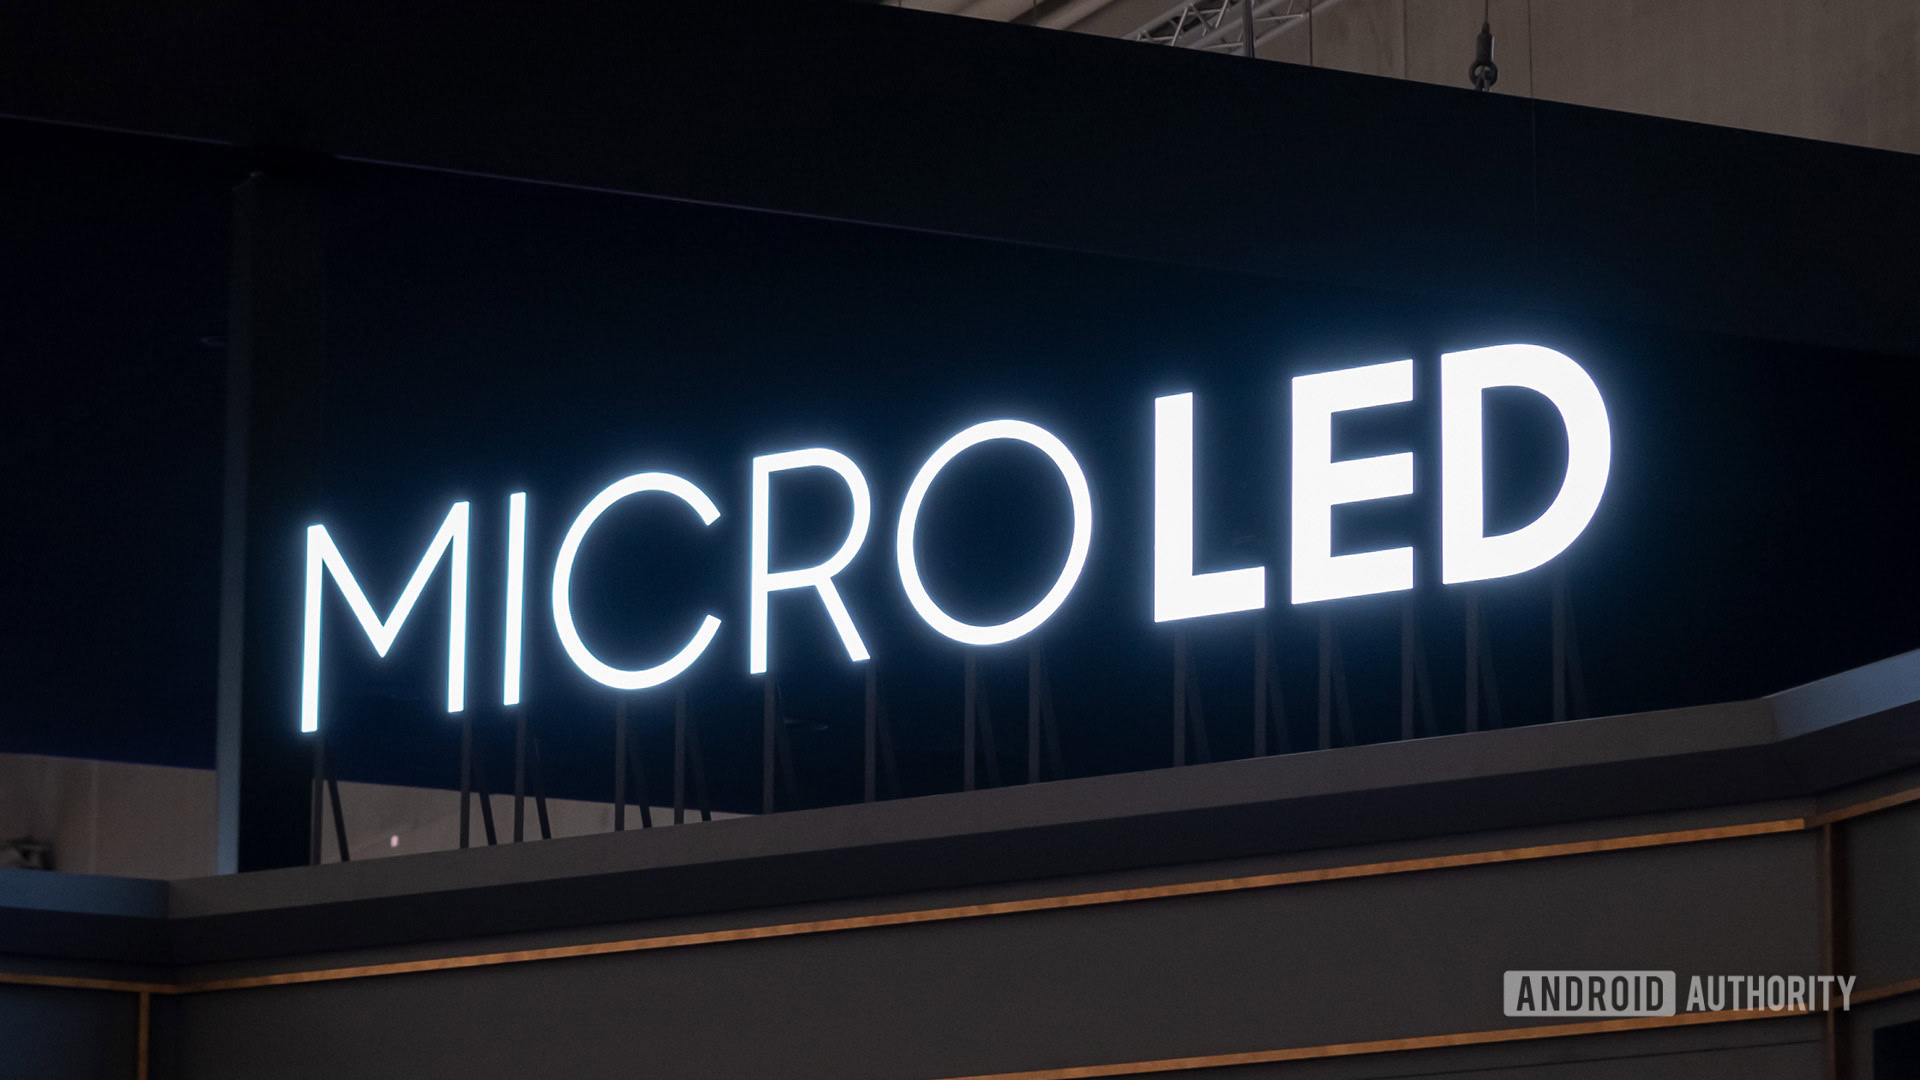 Mini-LED vs MicroLED - What Is The Difference? [Simple Guide]